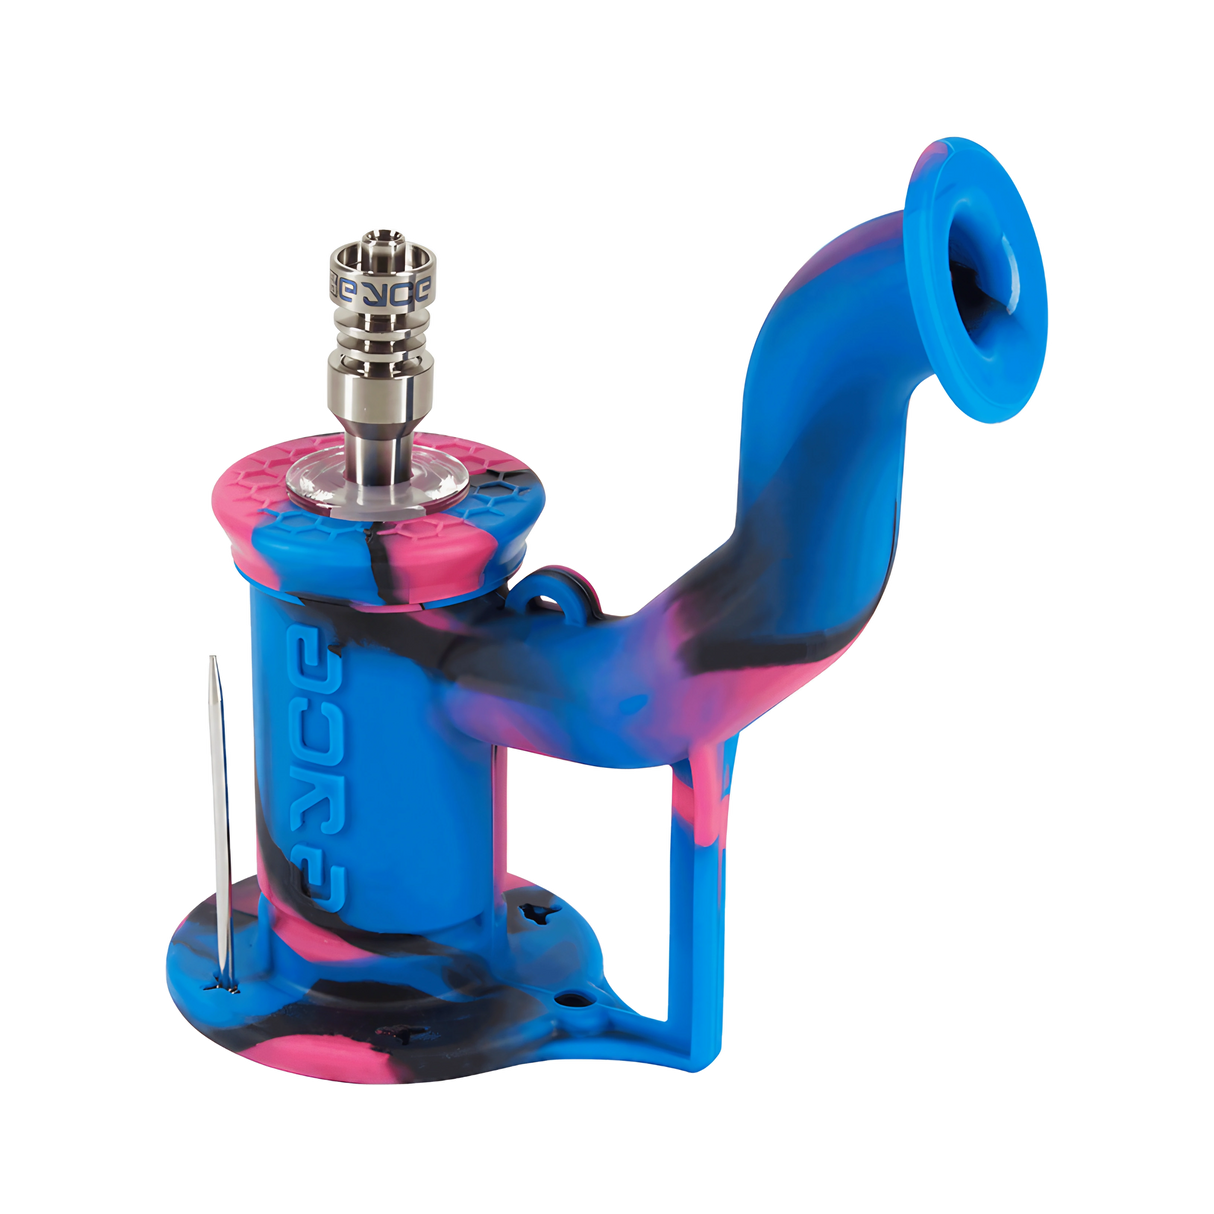 EYCE Rig 2.0 Silicone Dab Rig in Unicorn Pink with Titanium Nail - Angled Side View